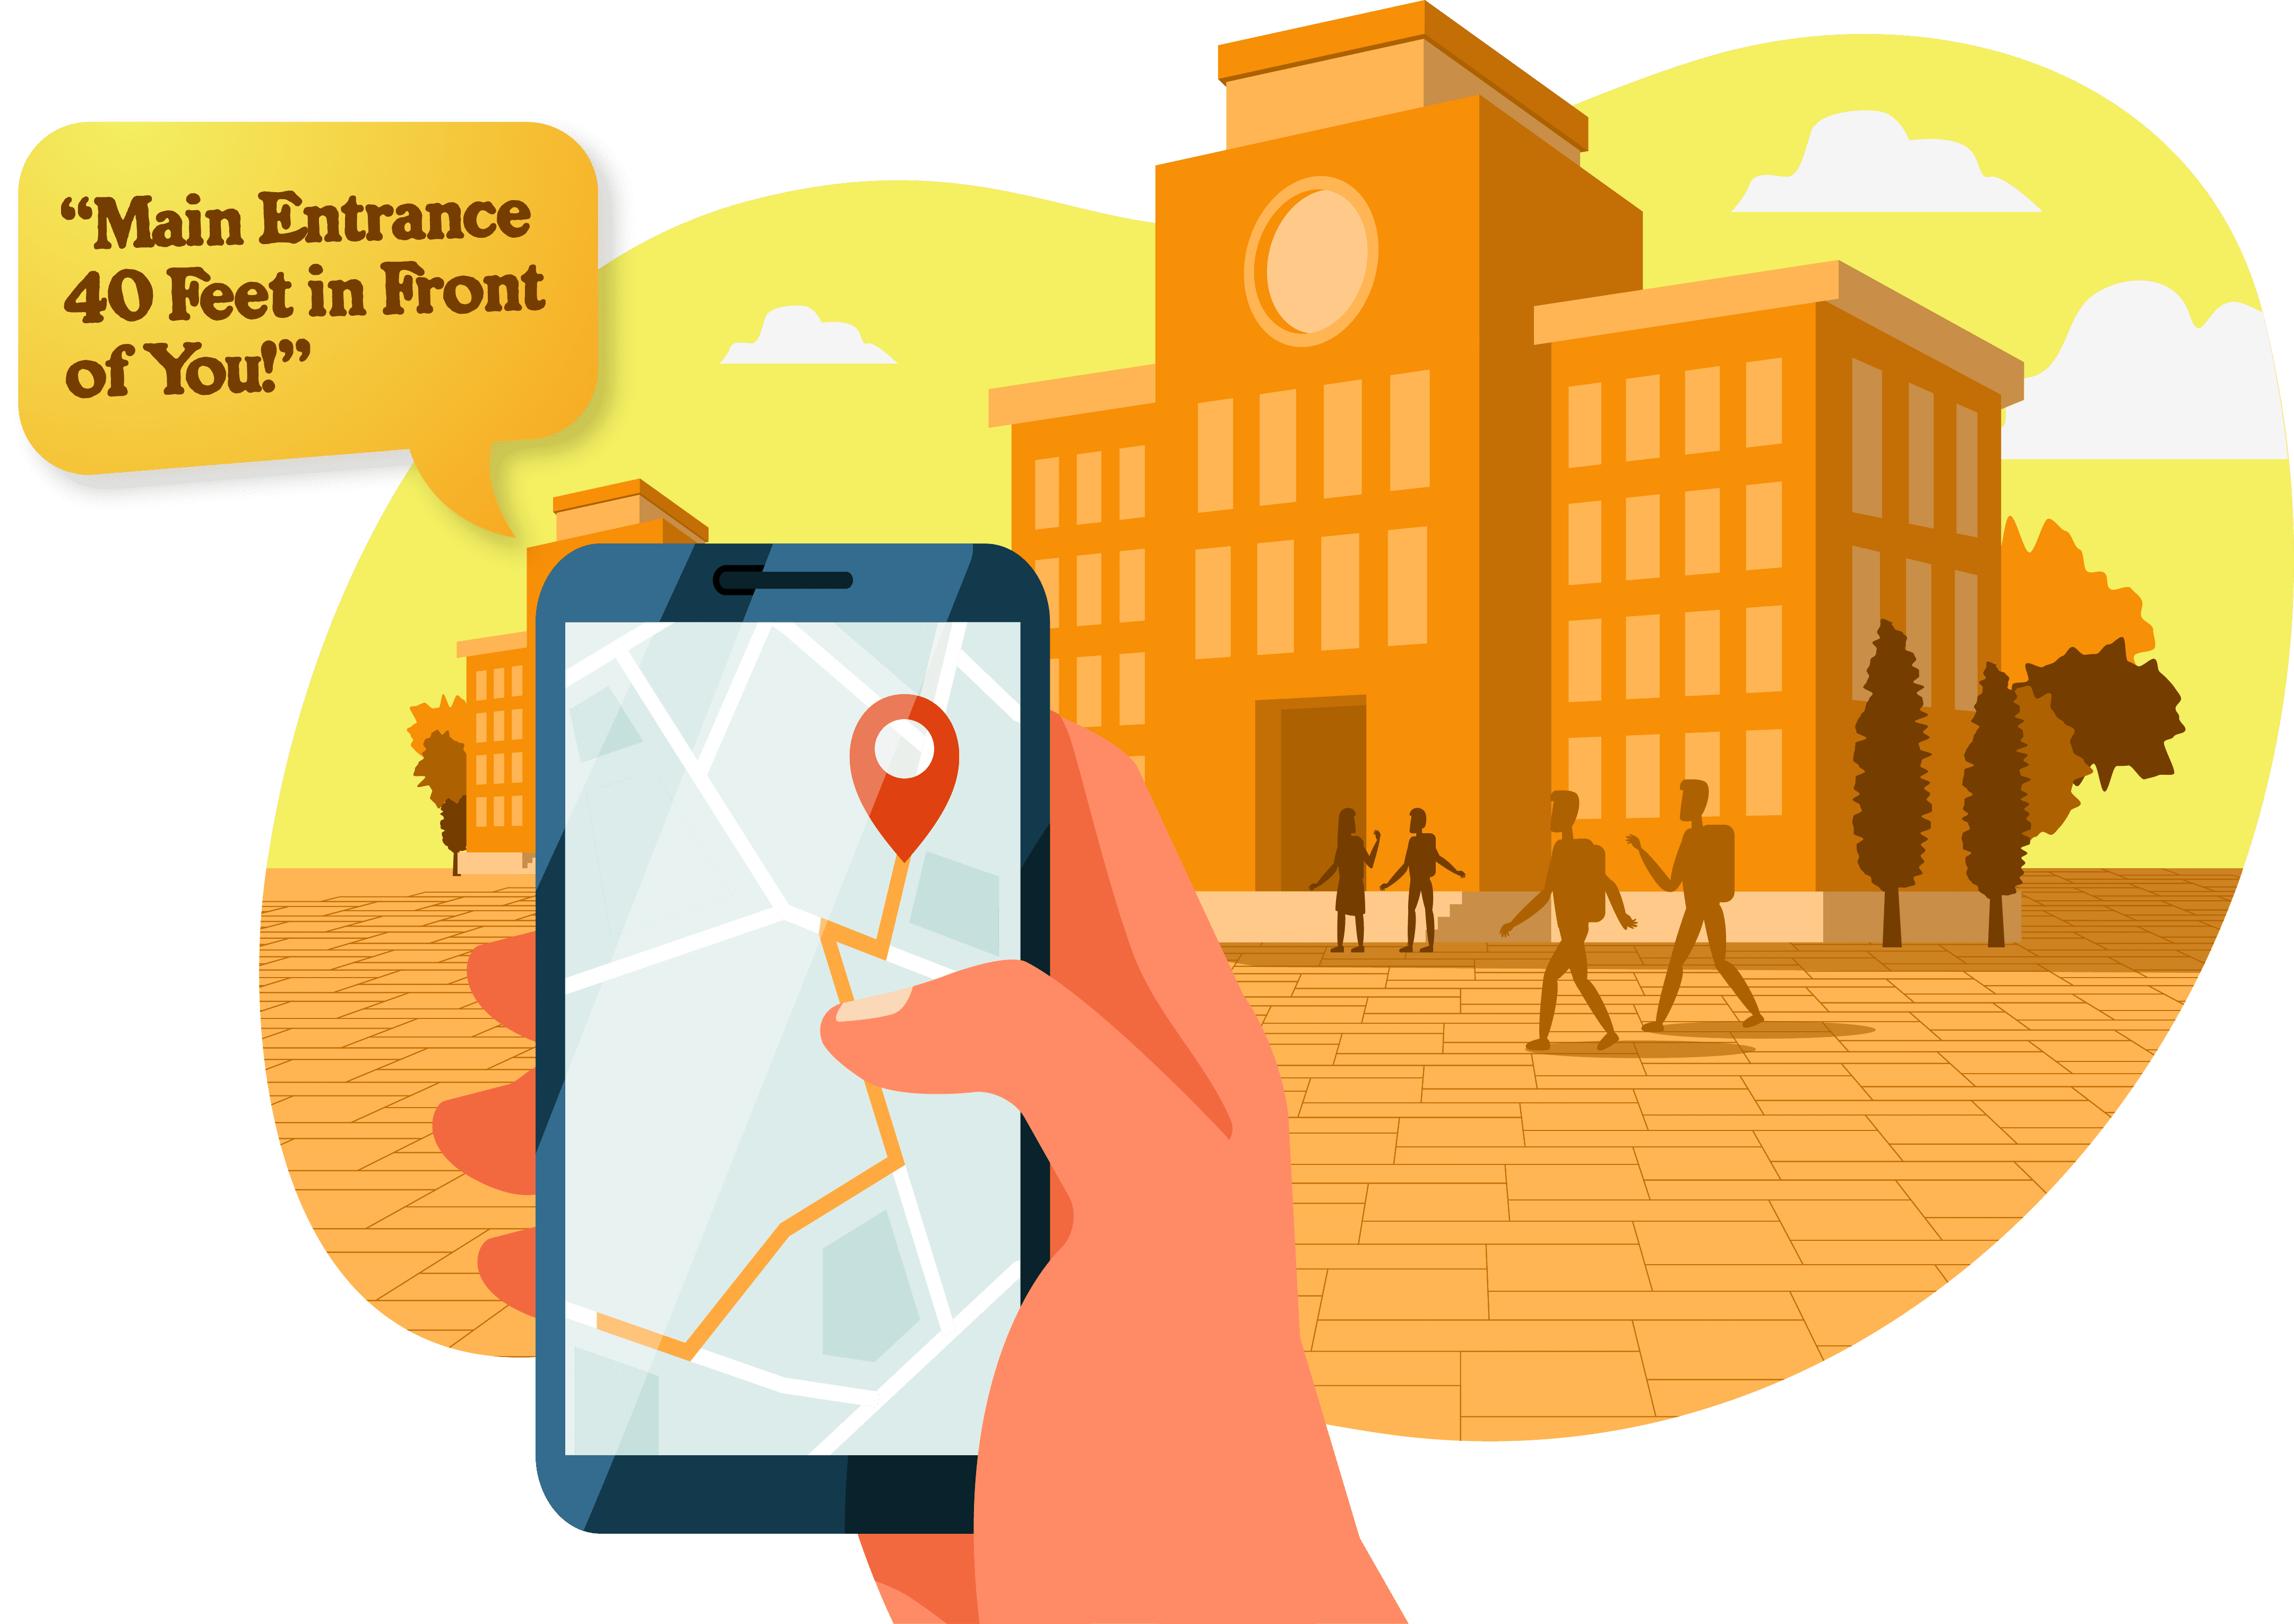 A person holds their phone in front of them as they approach a building on their University campus. The Lazarillo app is dictating to them "Main entrance 40 feet in front of you!"